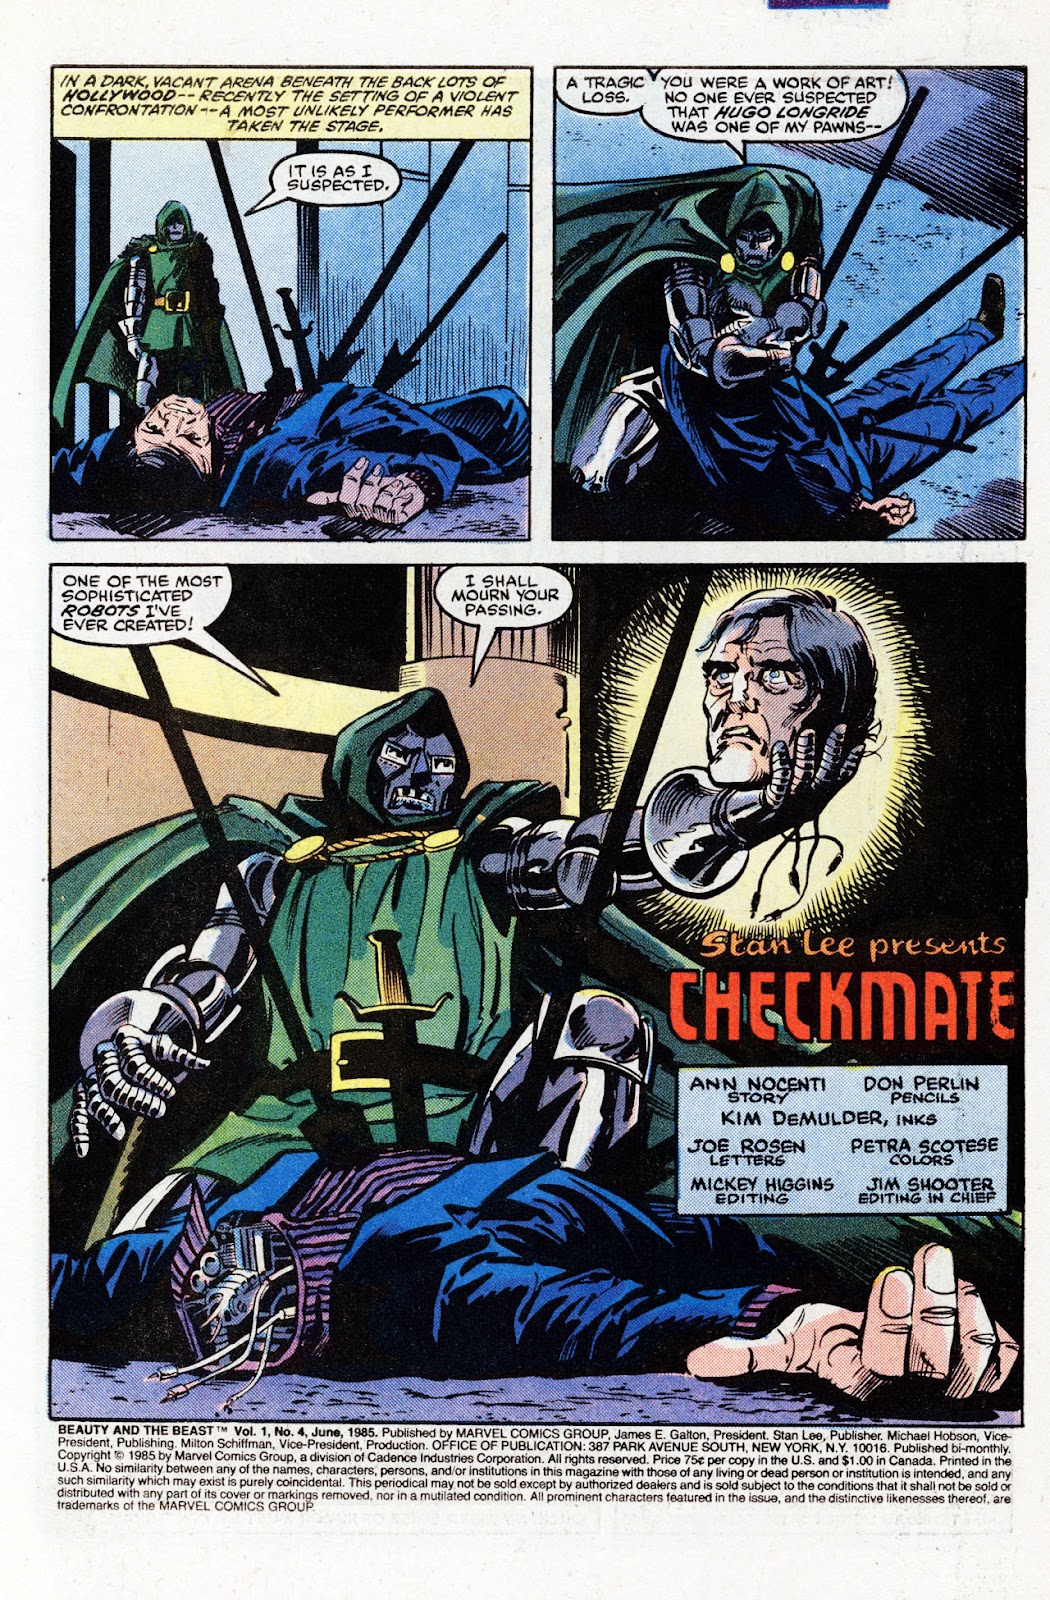 Beauty and the Beast (1984) issue 4 - Page 3